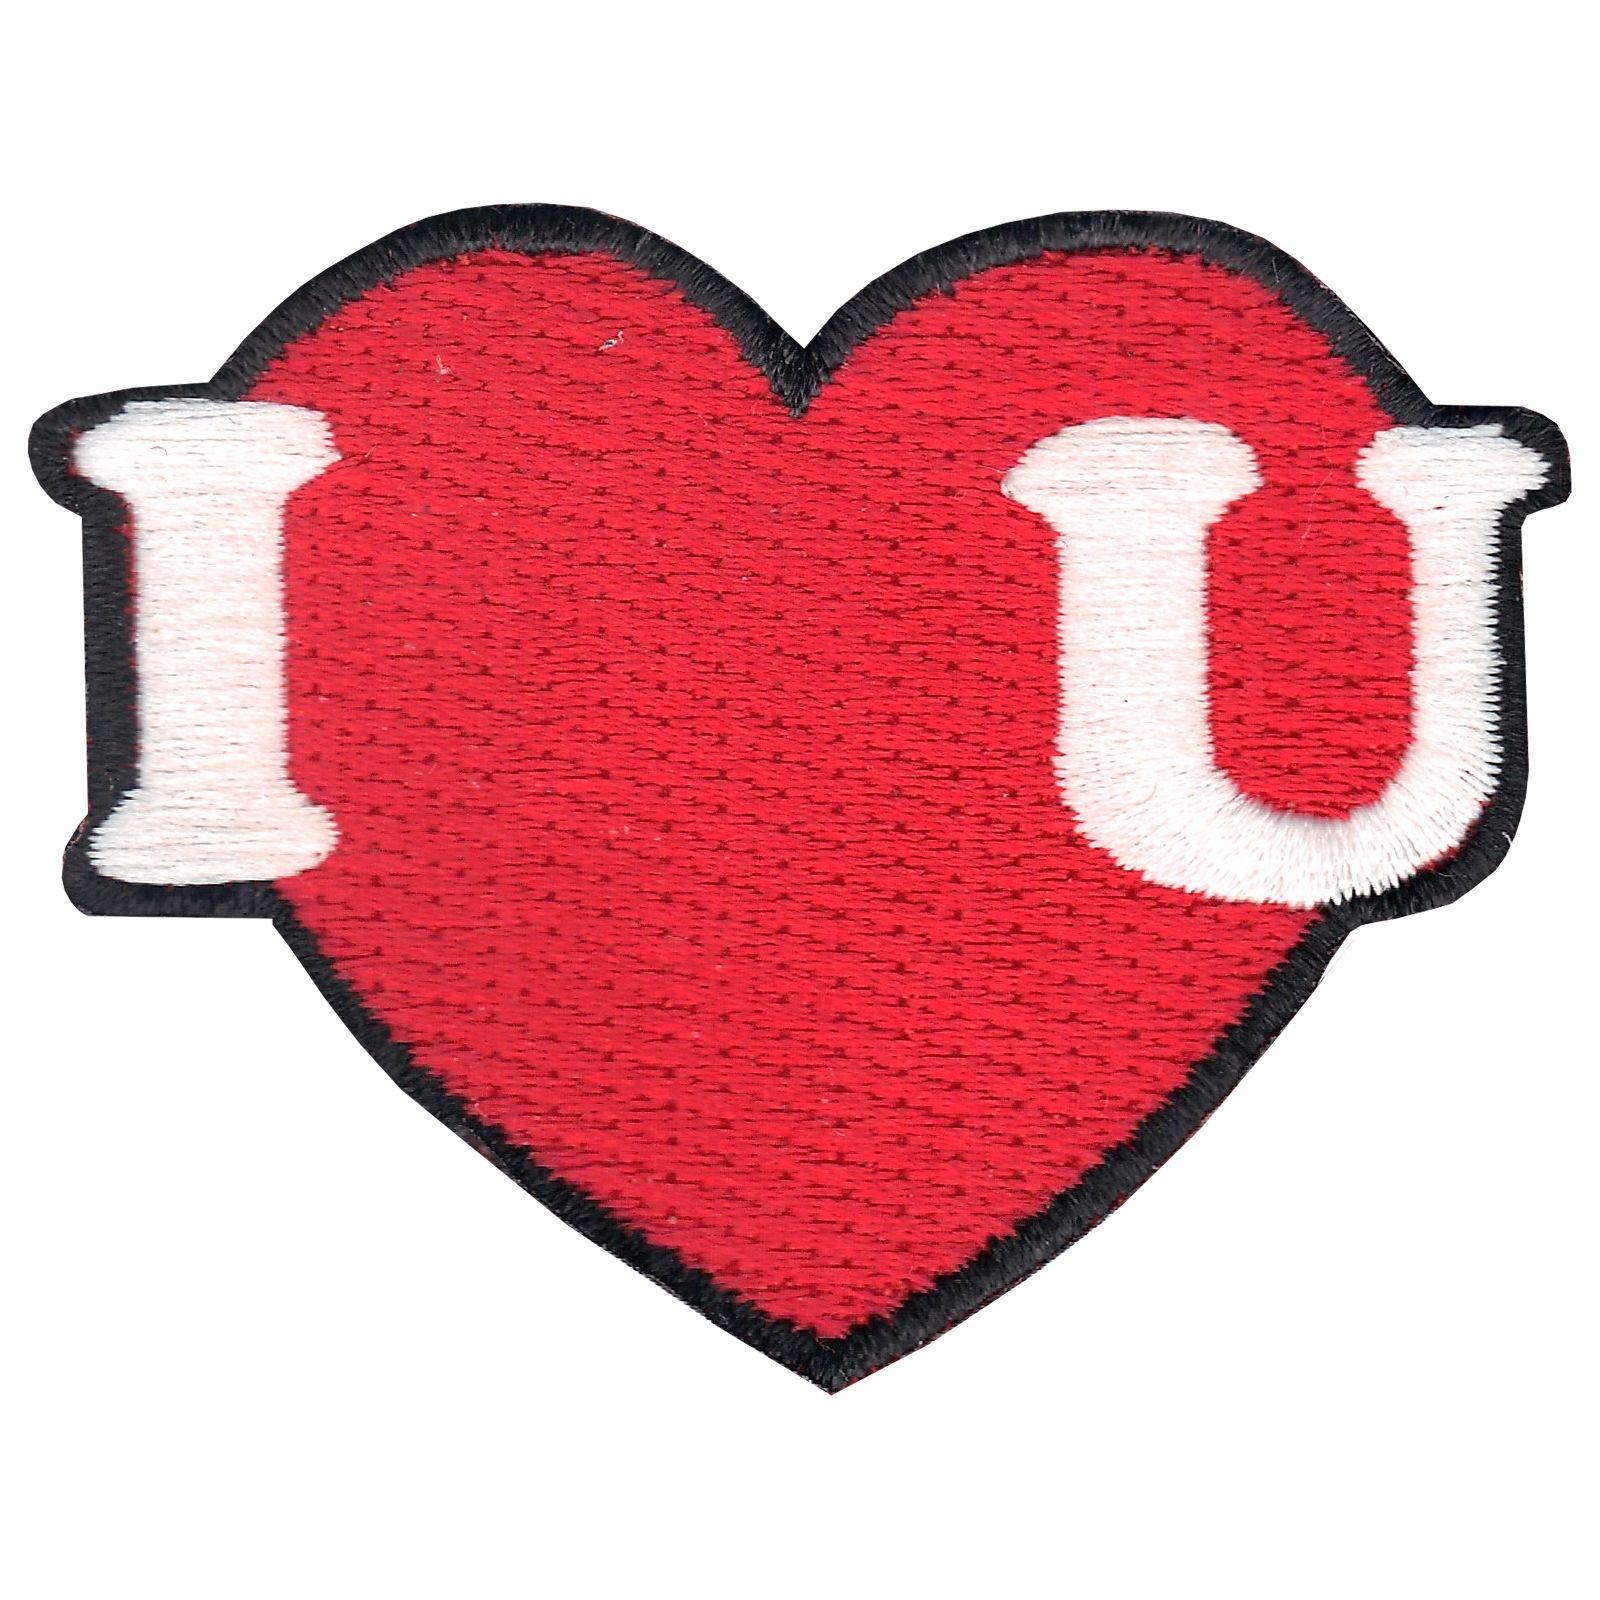 I Love You Heart Logo - I love You Heart Emoji Iron On Embroidered Applique Patch Set